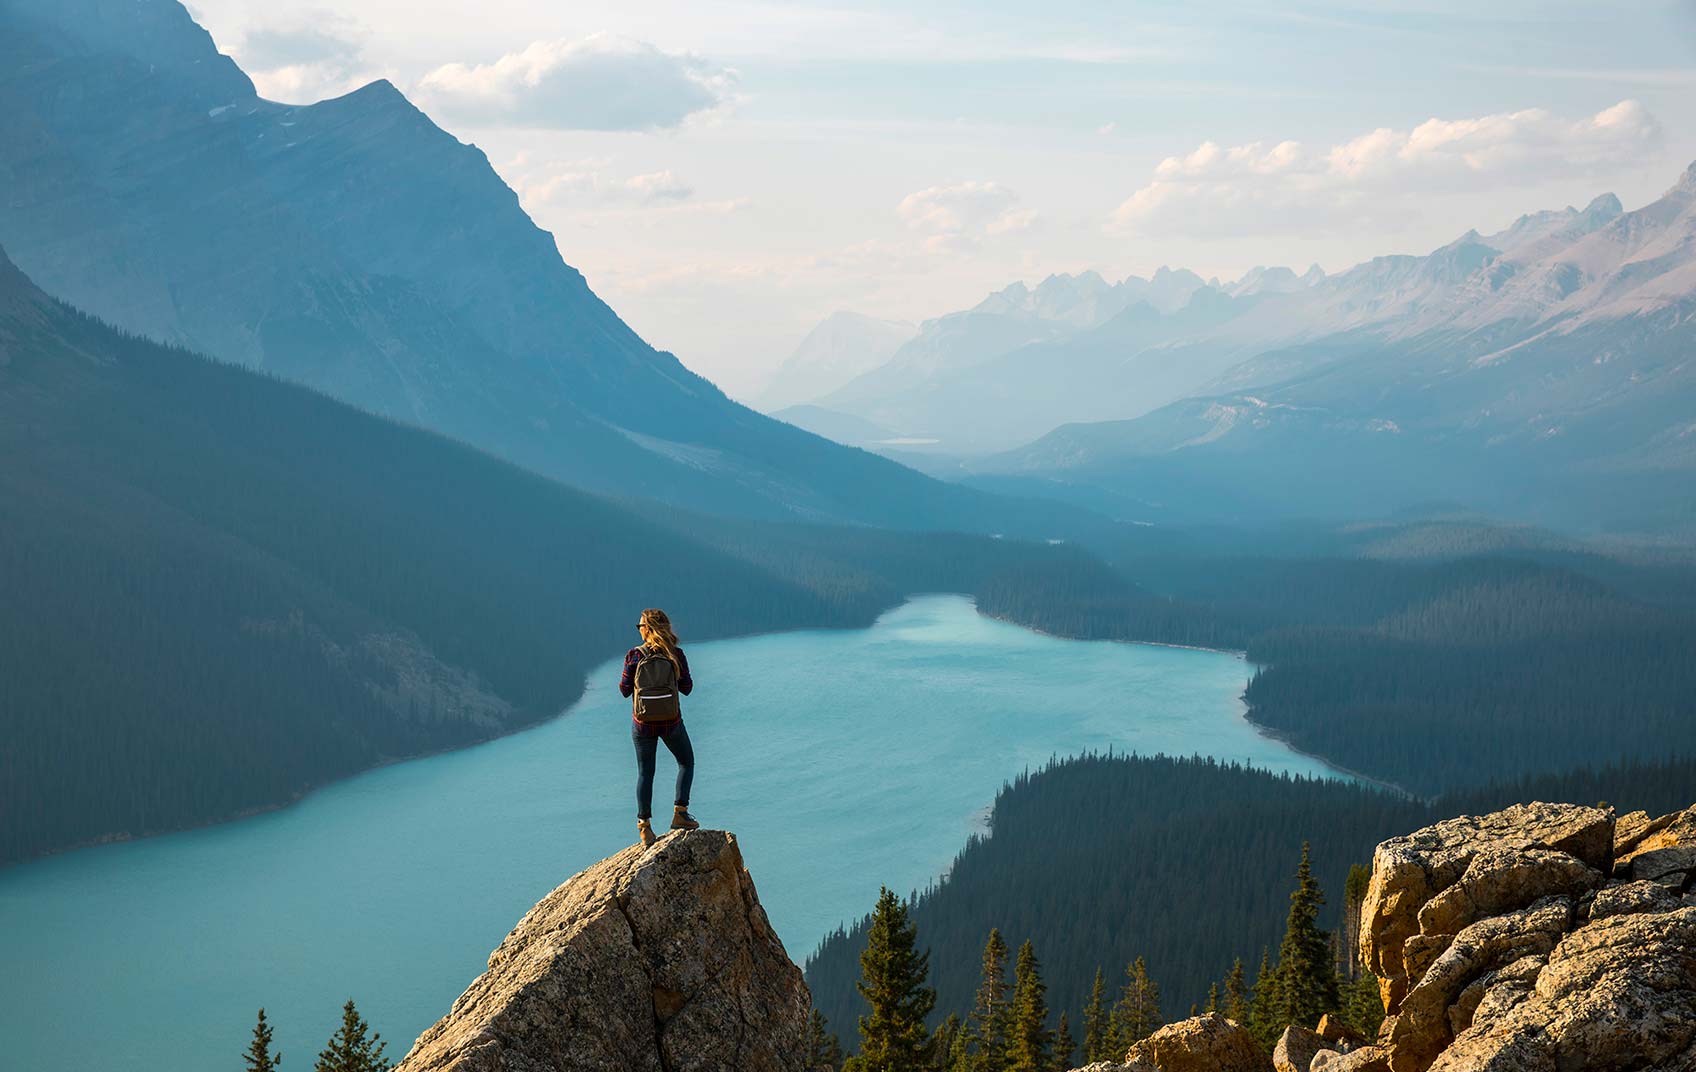 A hiker perched atop a mountain range overlooking a lake